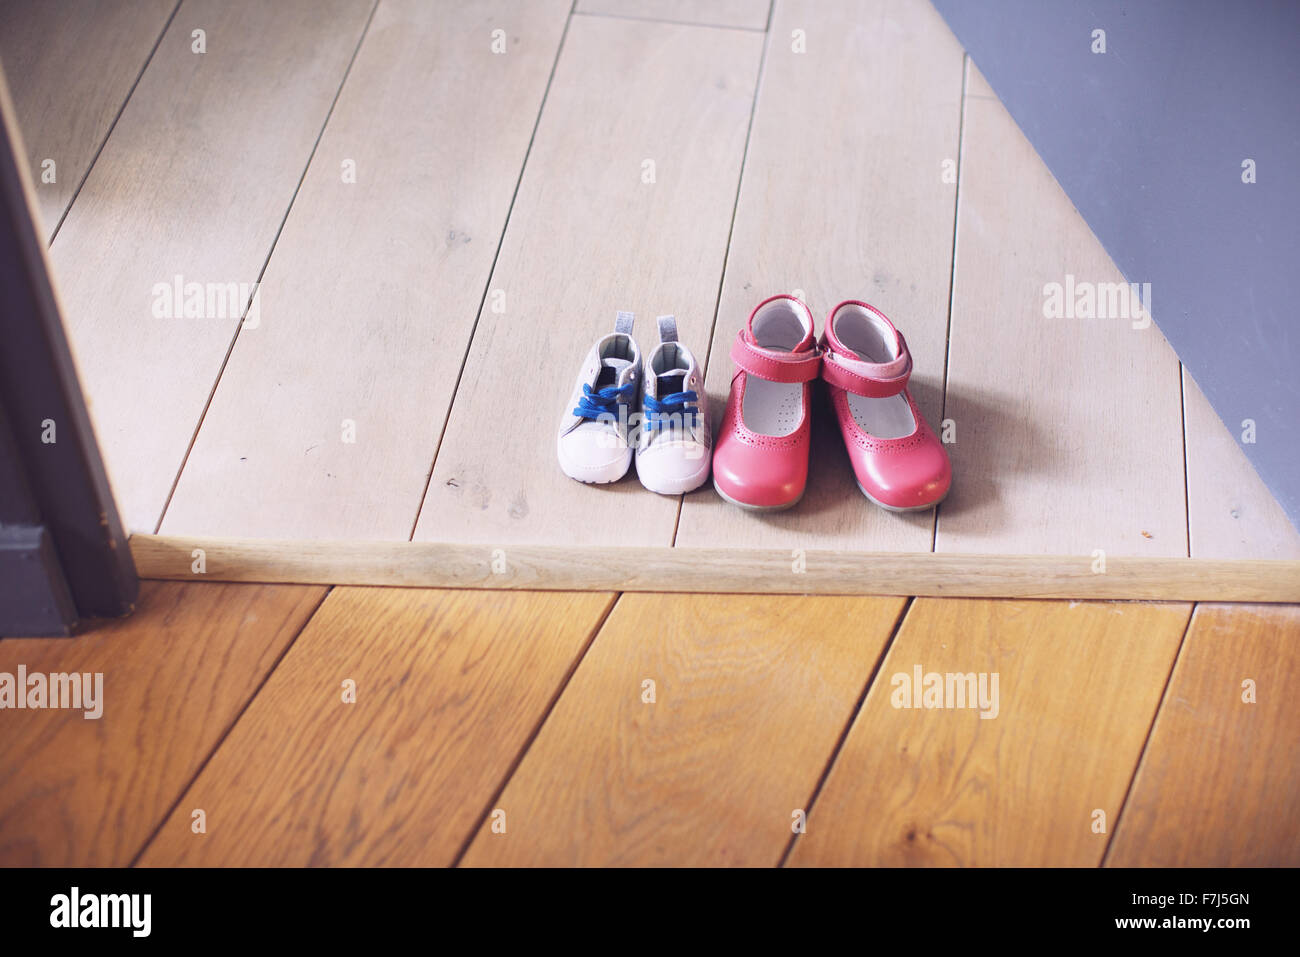 Children's shoes side by side on floor Stock Photo